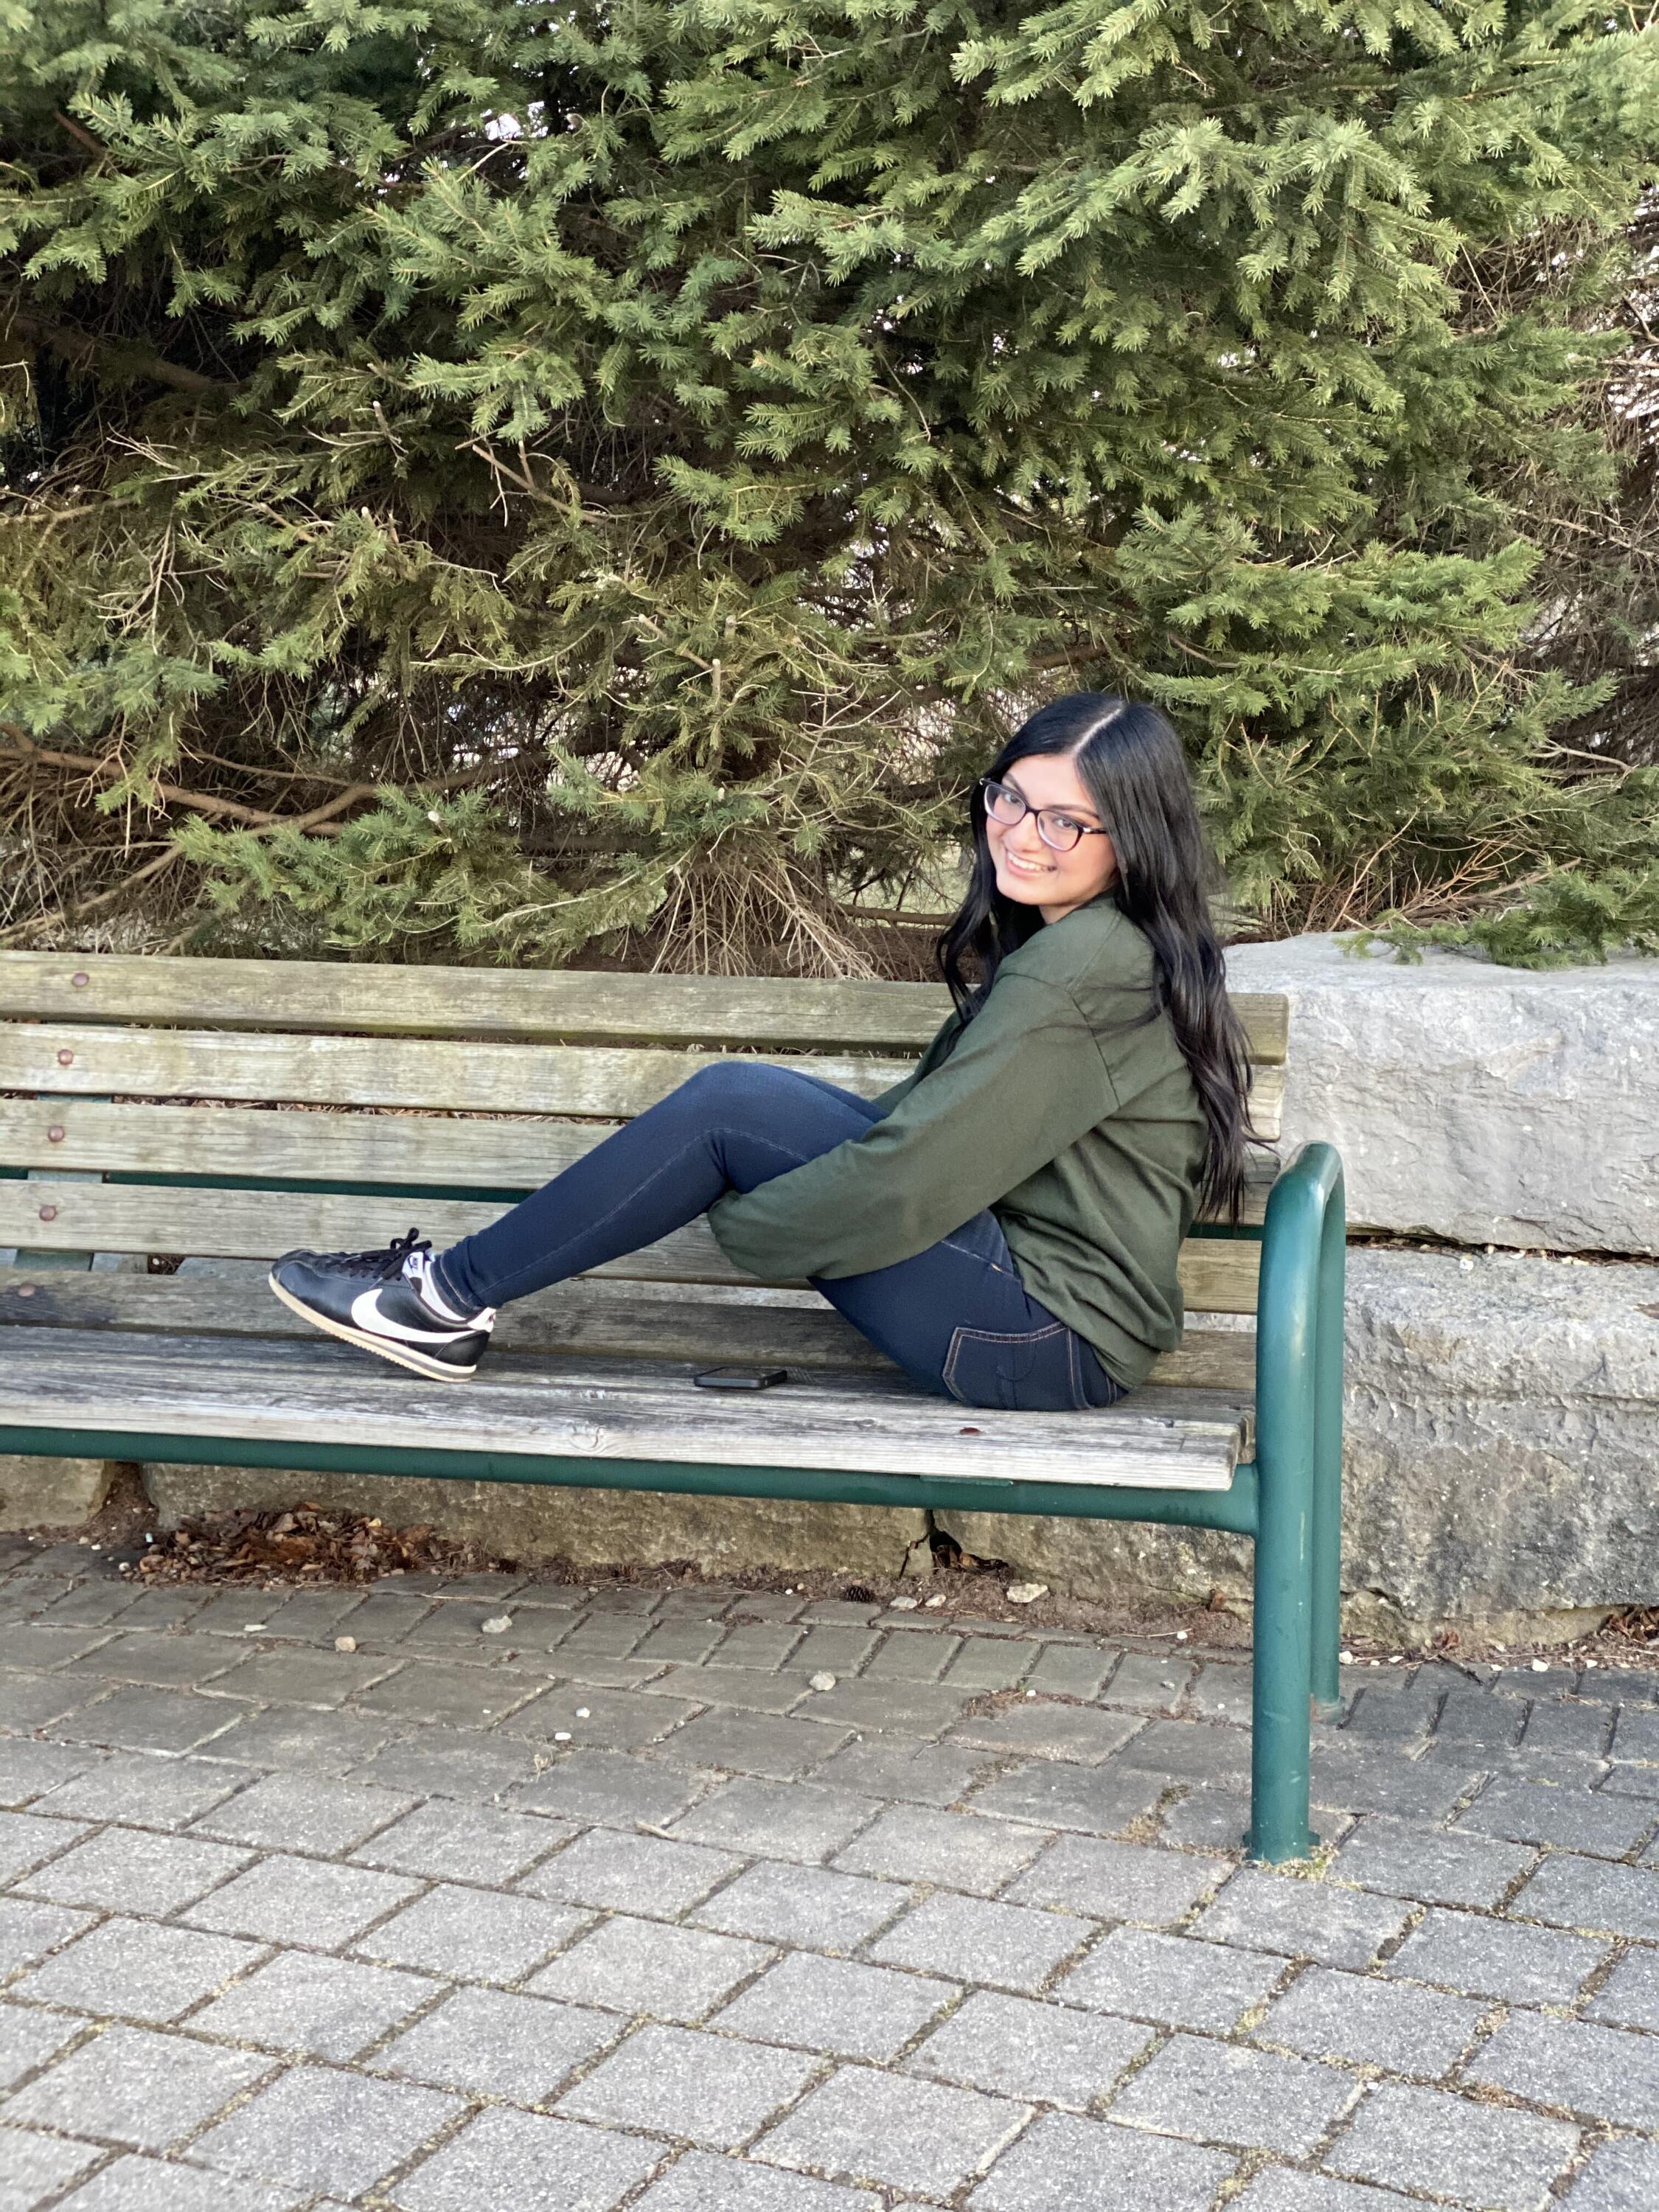 A photo of Sana sitting on a park bench outside and smiling.